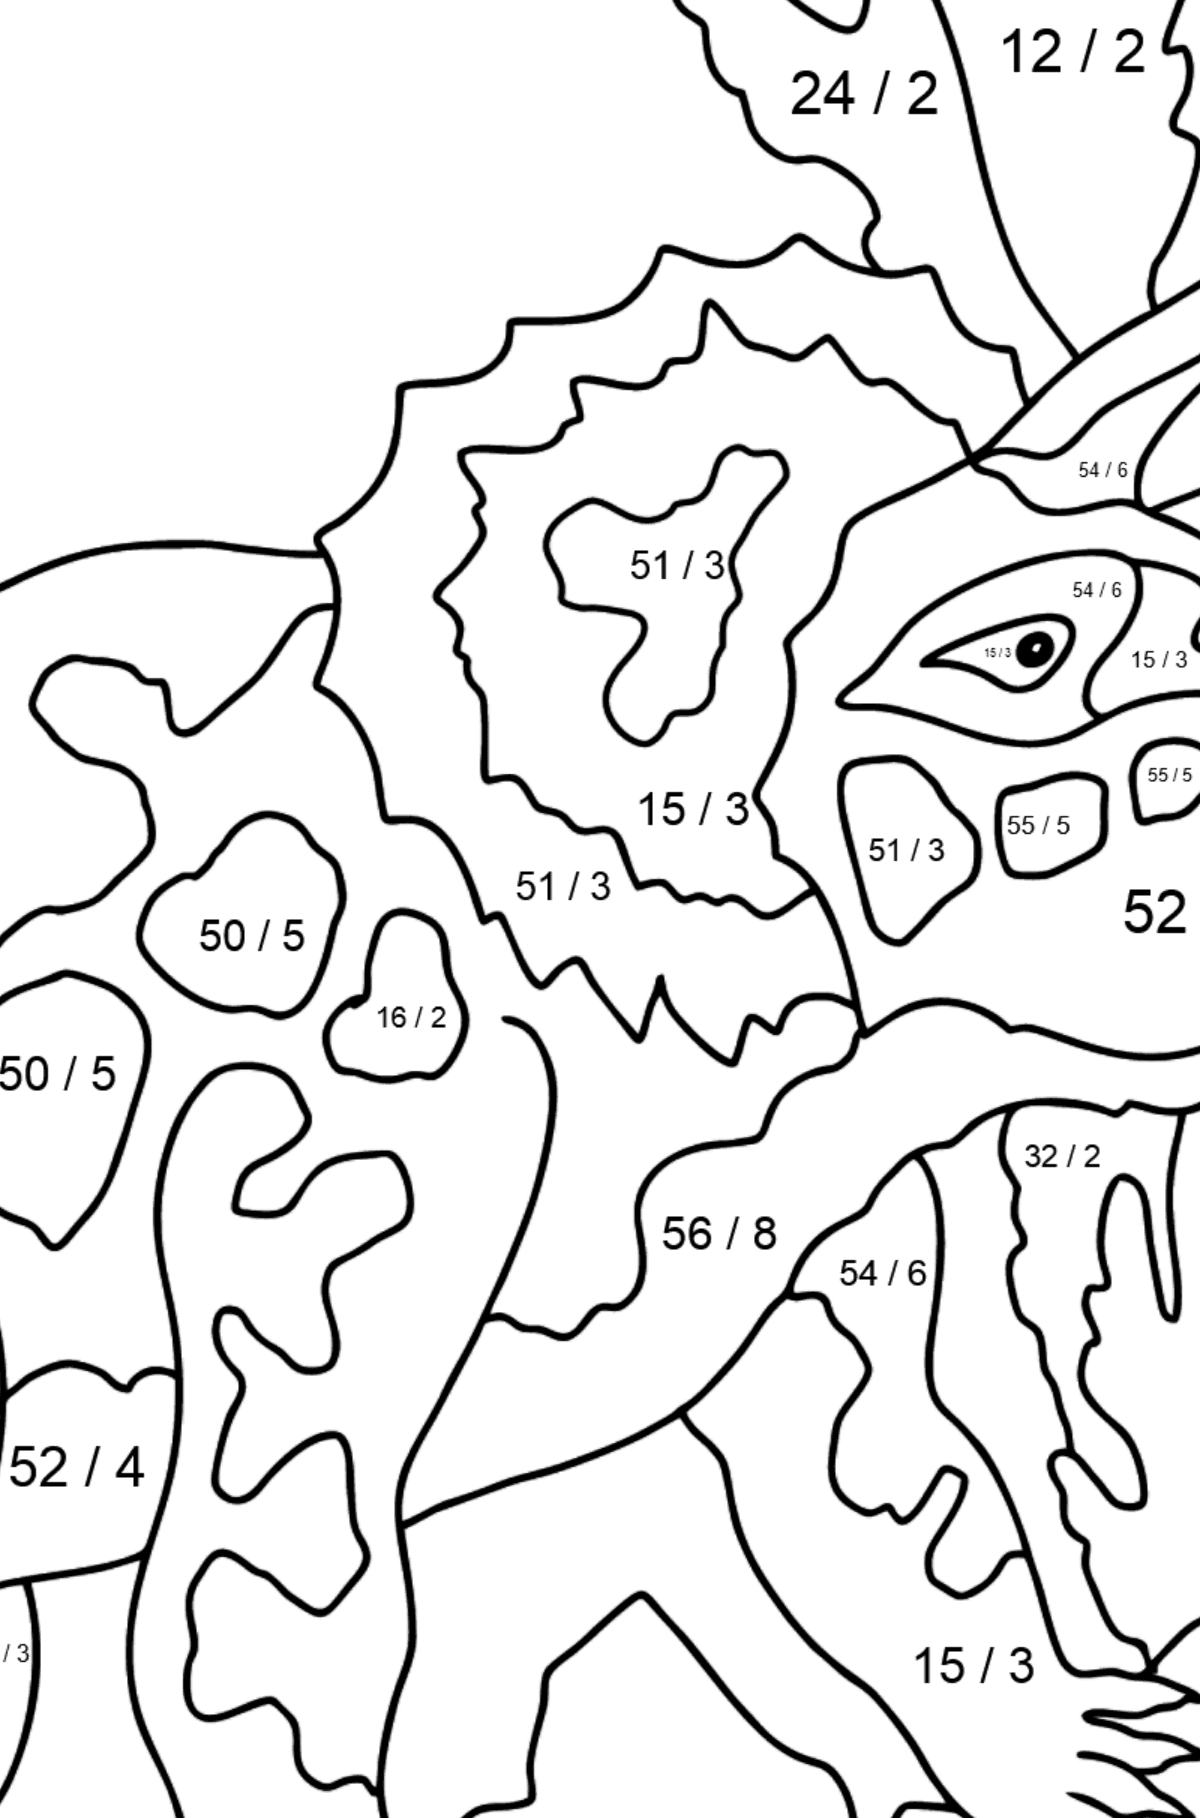 Coloring Page - Triceratops - A Grass-Eating Dinosaur - Math Coloring - Division for Kids